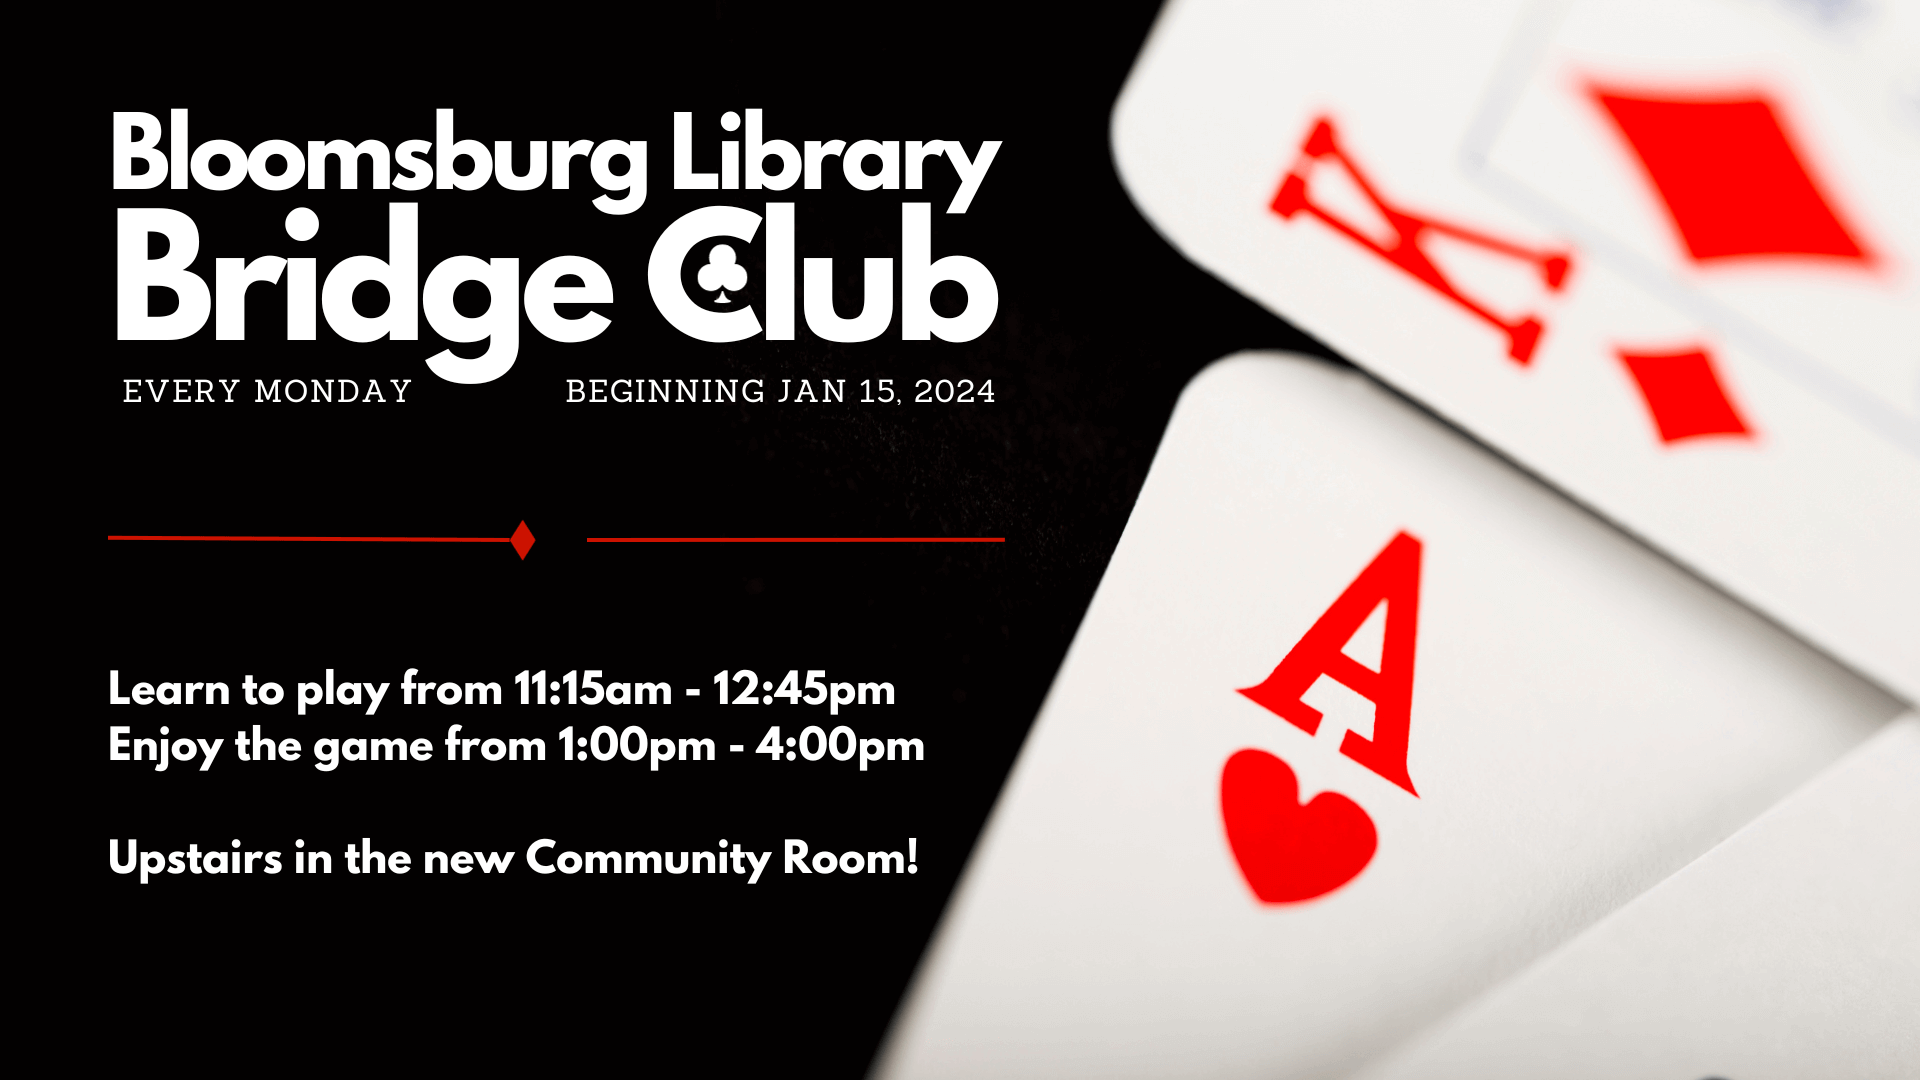 Bloomsburg Library Bridge Club Mondays 1-4pm, Learn to play 11:15-12:45pm